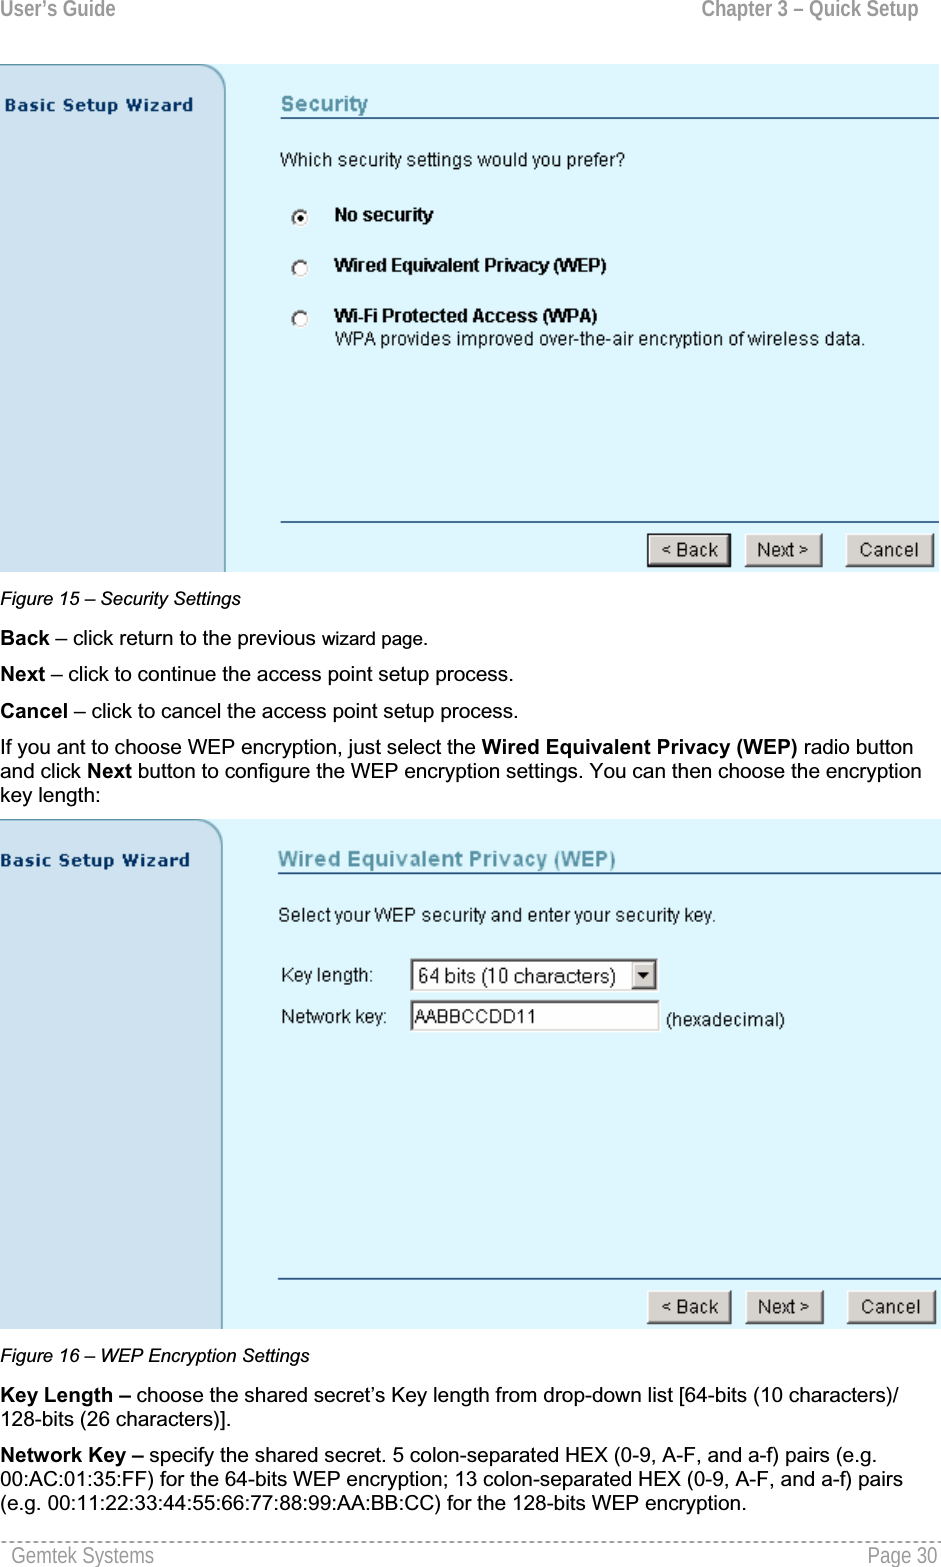 User’s Guide  Chapter 3 – Quick SetupFigure 15 – Security Settings Back – click return to the previous wizard page. Next – click to continue the access point setup process.Cancel – click to cancel the access point setup process.If you ant to choose WEP encryption, just select the Wired Equivalent Privacy (WEP) radio buttonand click Next button to configure the WEP encryption settings. You can then choose the encryptionkey length: Figure 16 – WEP Encryption SettingsKey Length – choose the shared secret’s Key length from drop-down list [64-bits (10 characters)/128-bits (26 characters)].Network Key – specify the shared secret. 5 colon-separated HEX (0-9, A-F, and a-f) pairs (e.g.00:AC:01:35:FF) for the 64-bits WEP encryption; 13 colon-separated HEX (0-9, A-F, and a-f) pairs (e.g. 00:11:22:33:44:55:66:77:88:99:AA:BB:CC) for the 128-bits WEP encryption.Gemtek Systems  Page 30